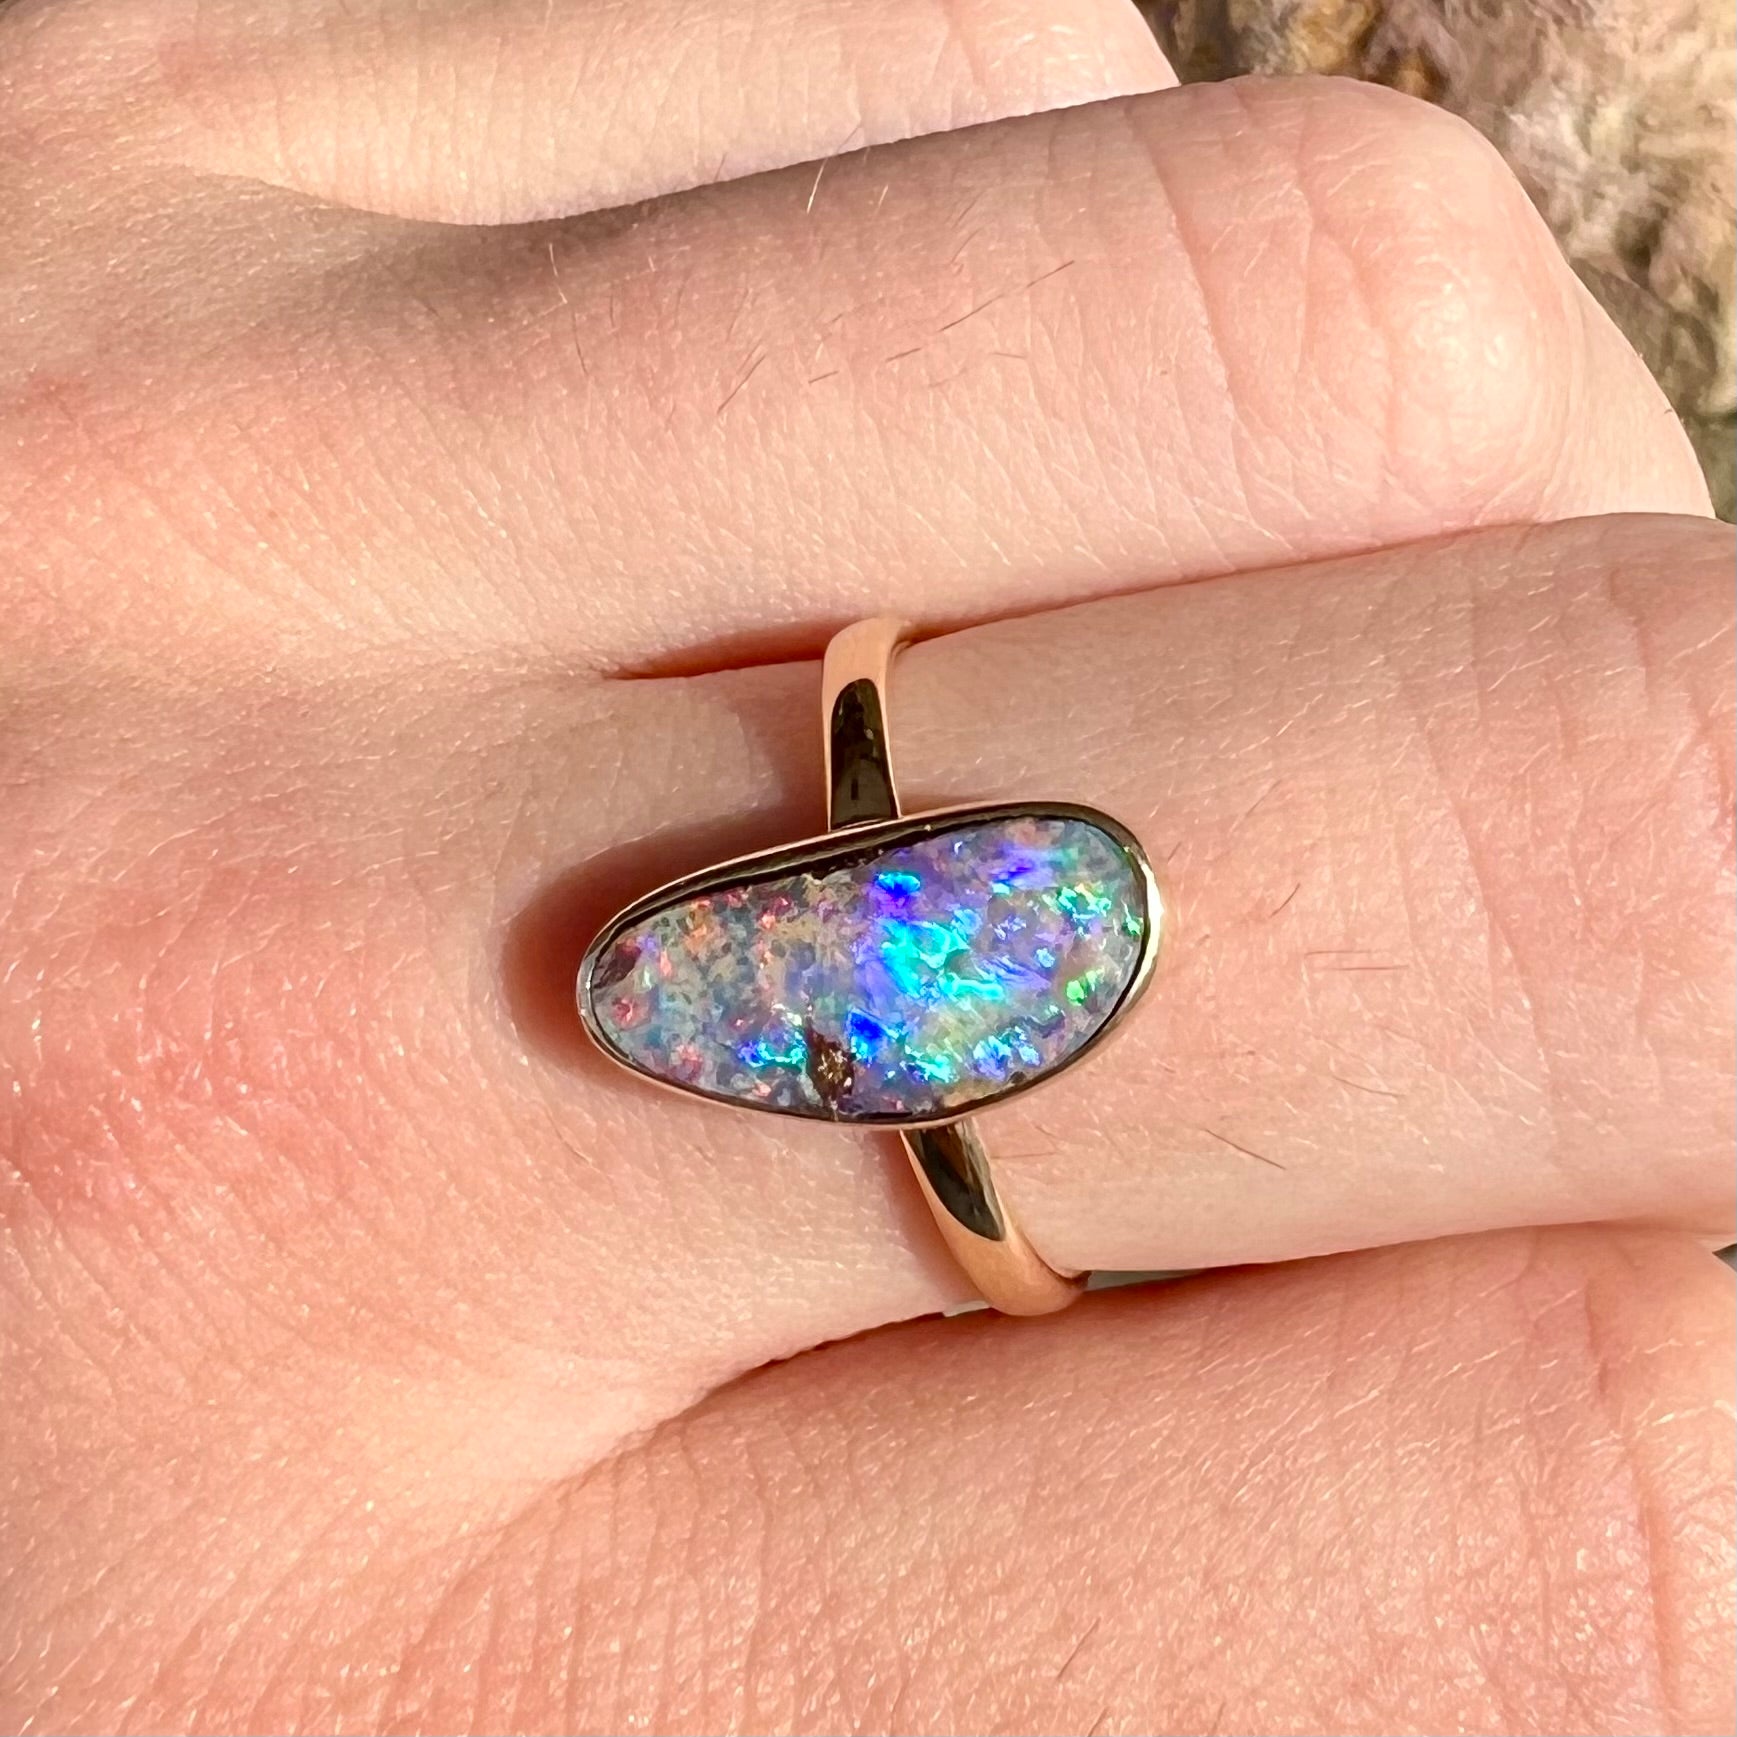 A bright, freeform cabochon cut rainbow boulder opal set in a yellow gold solitaire ring.